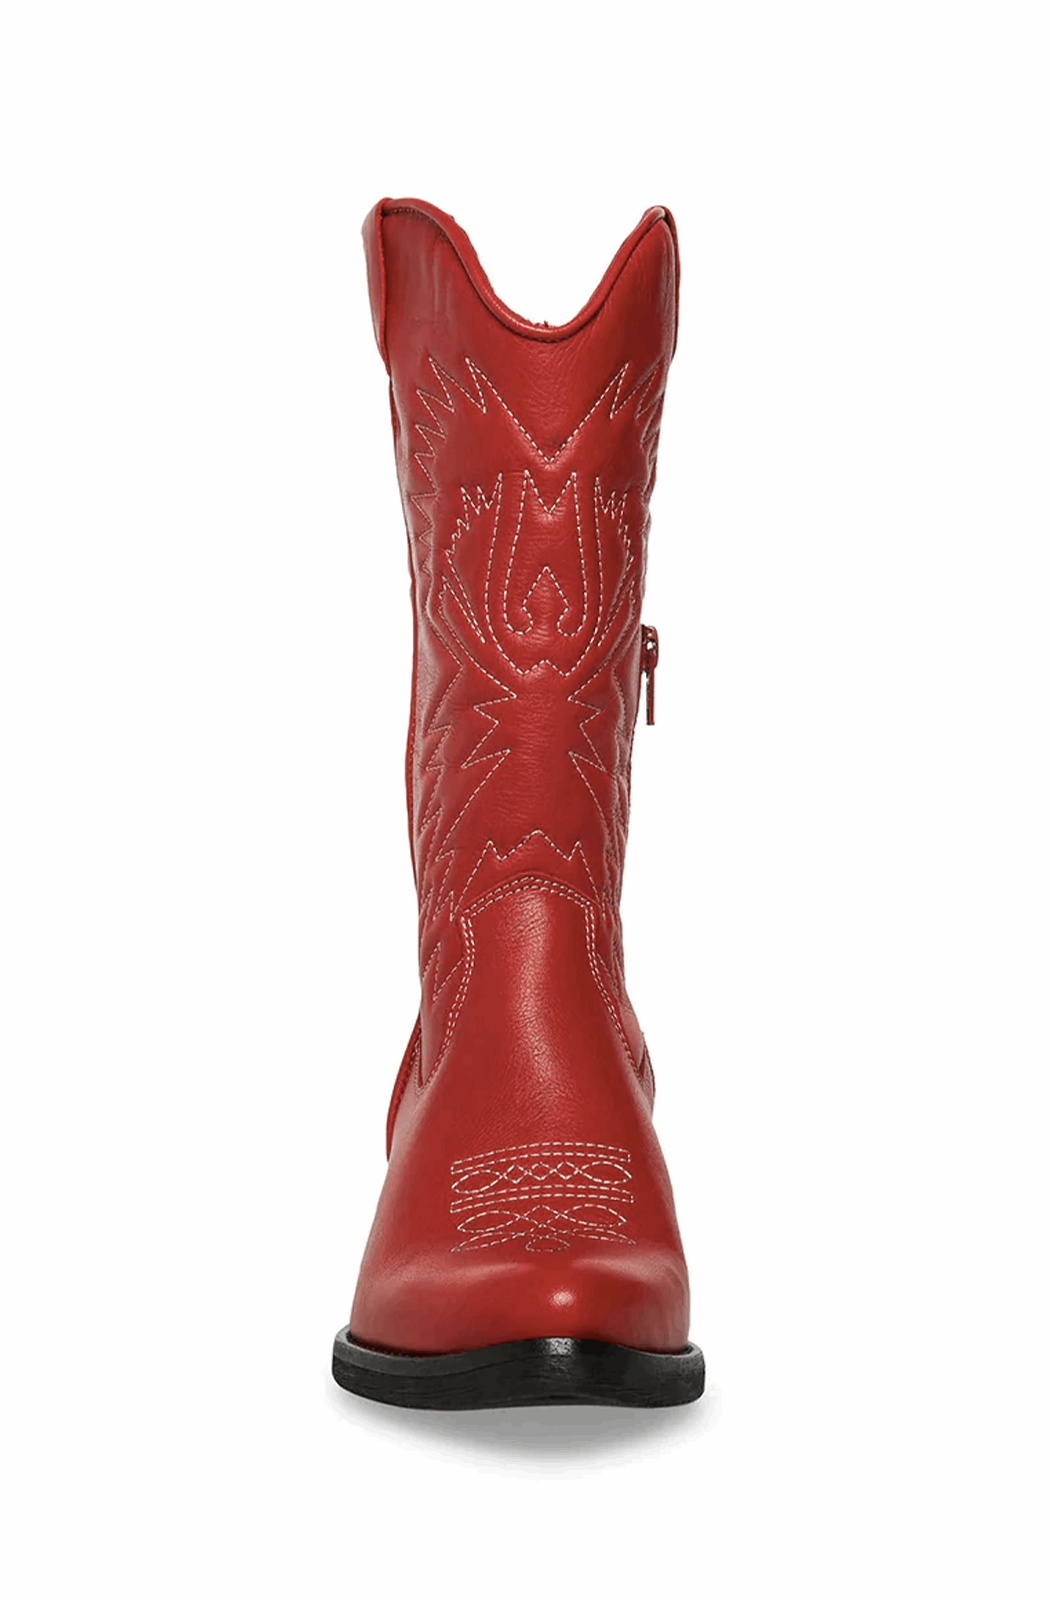 Red western boots